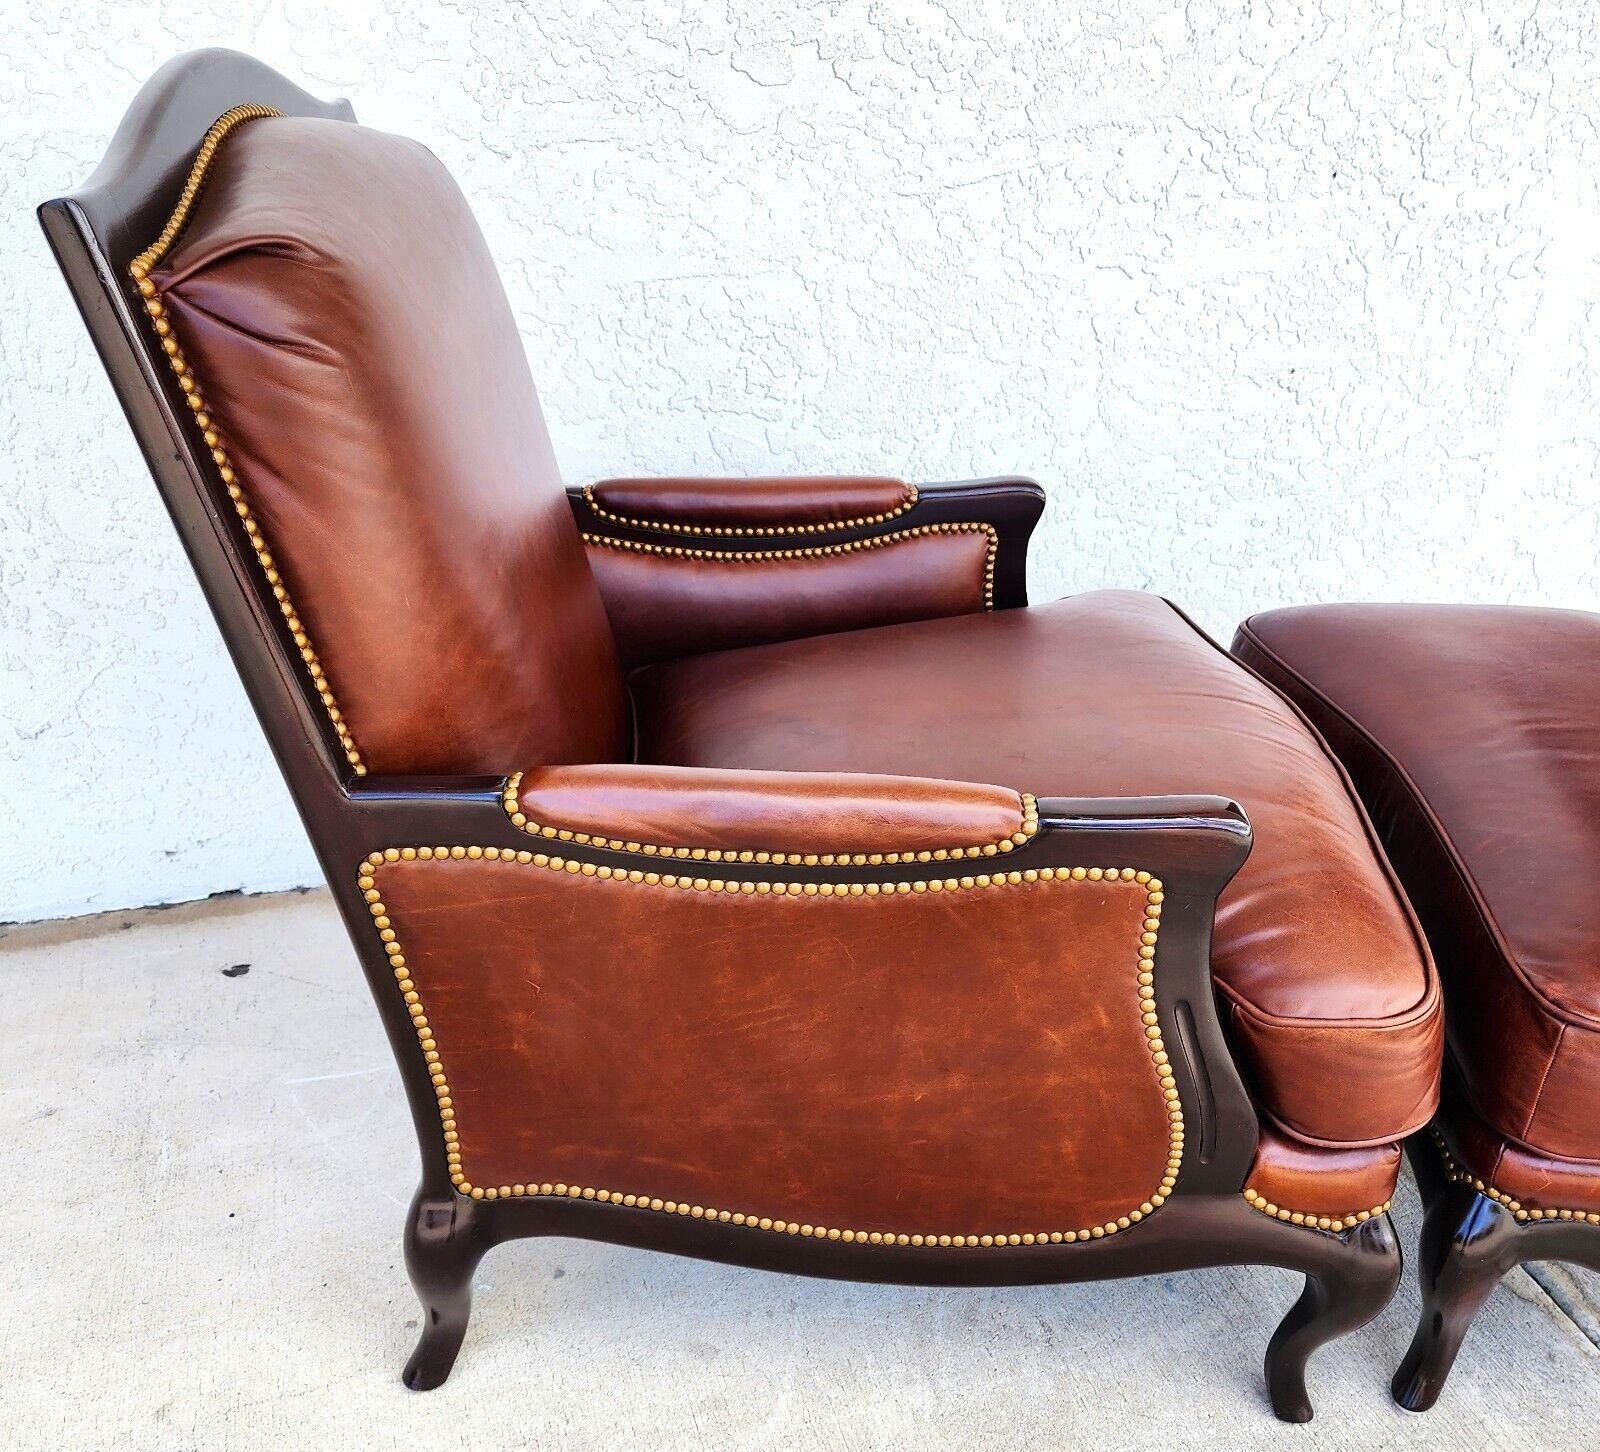 For FULL item description click on CONTINUE READING at the bottom of this page.

Offering One Of Our Recent Palm Beach Estate Fine Furniture Acquisitions Of A
Highly Stylized Top Grain Leather Lounge Chair and Ottoman by Henredon Leather